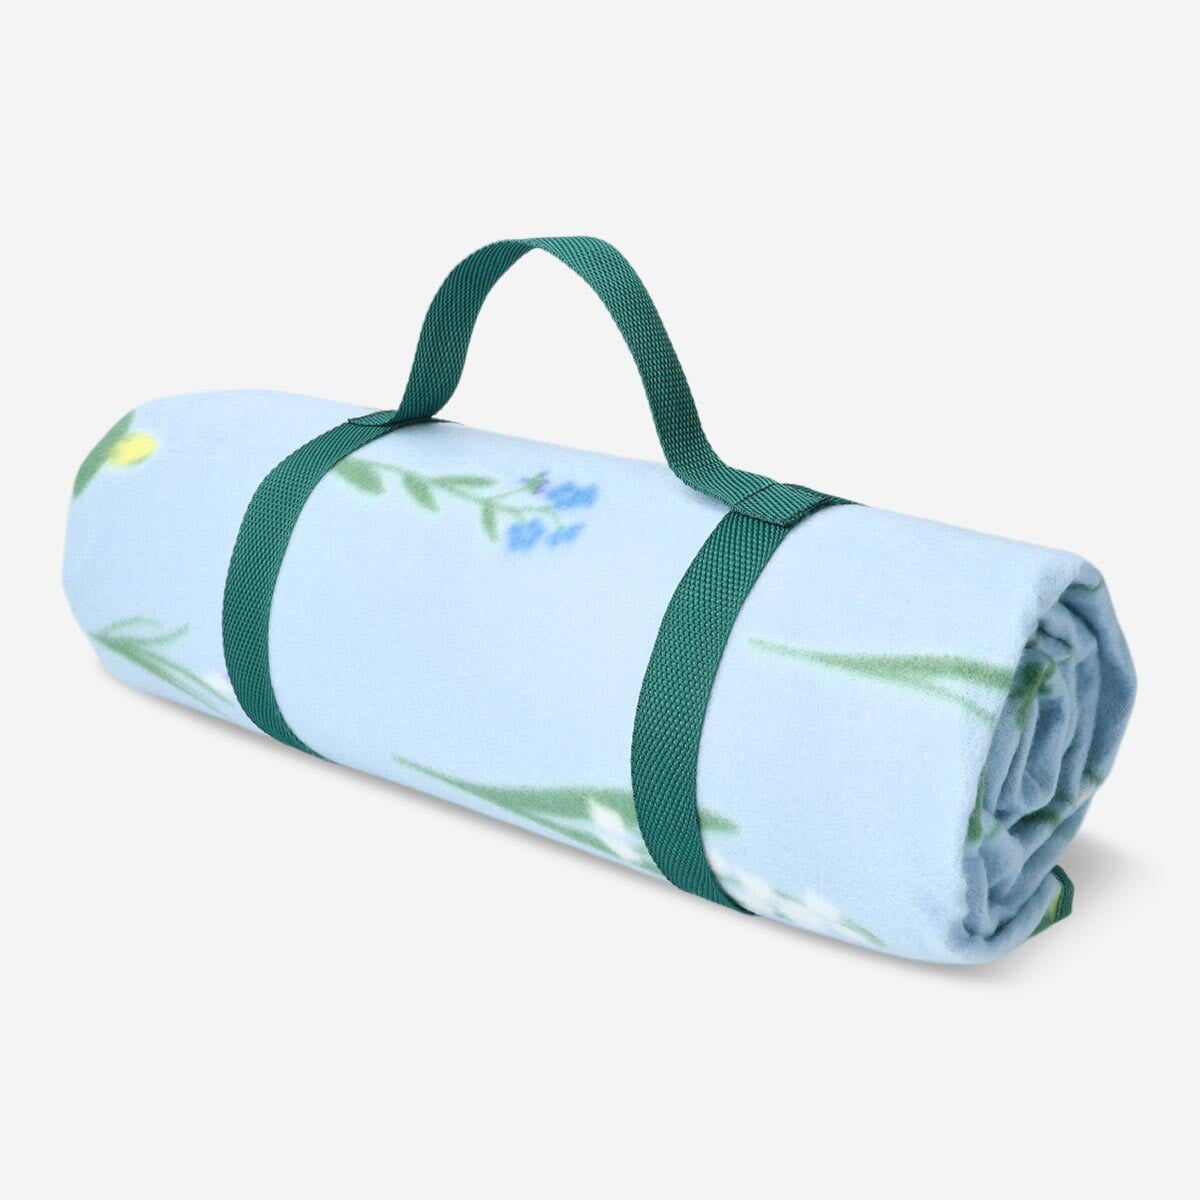 Picnic blanket. With carrying strap Leisure Flying Tiger Copenhagen 